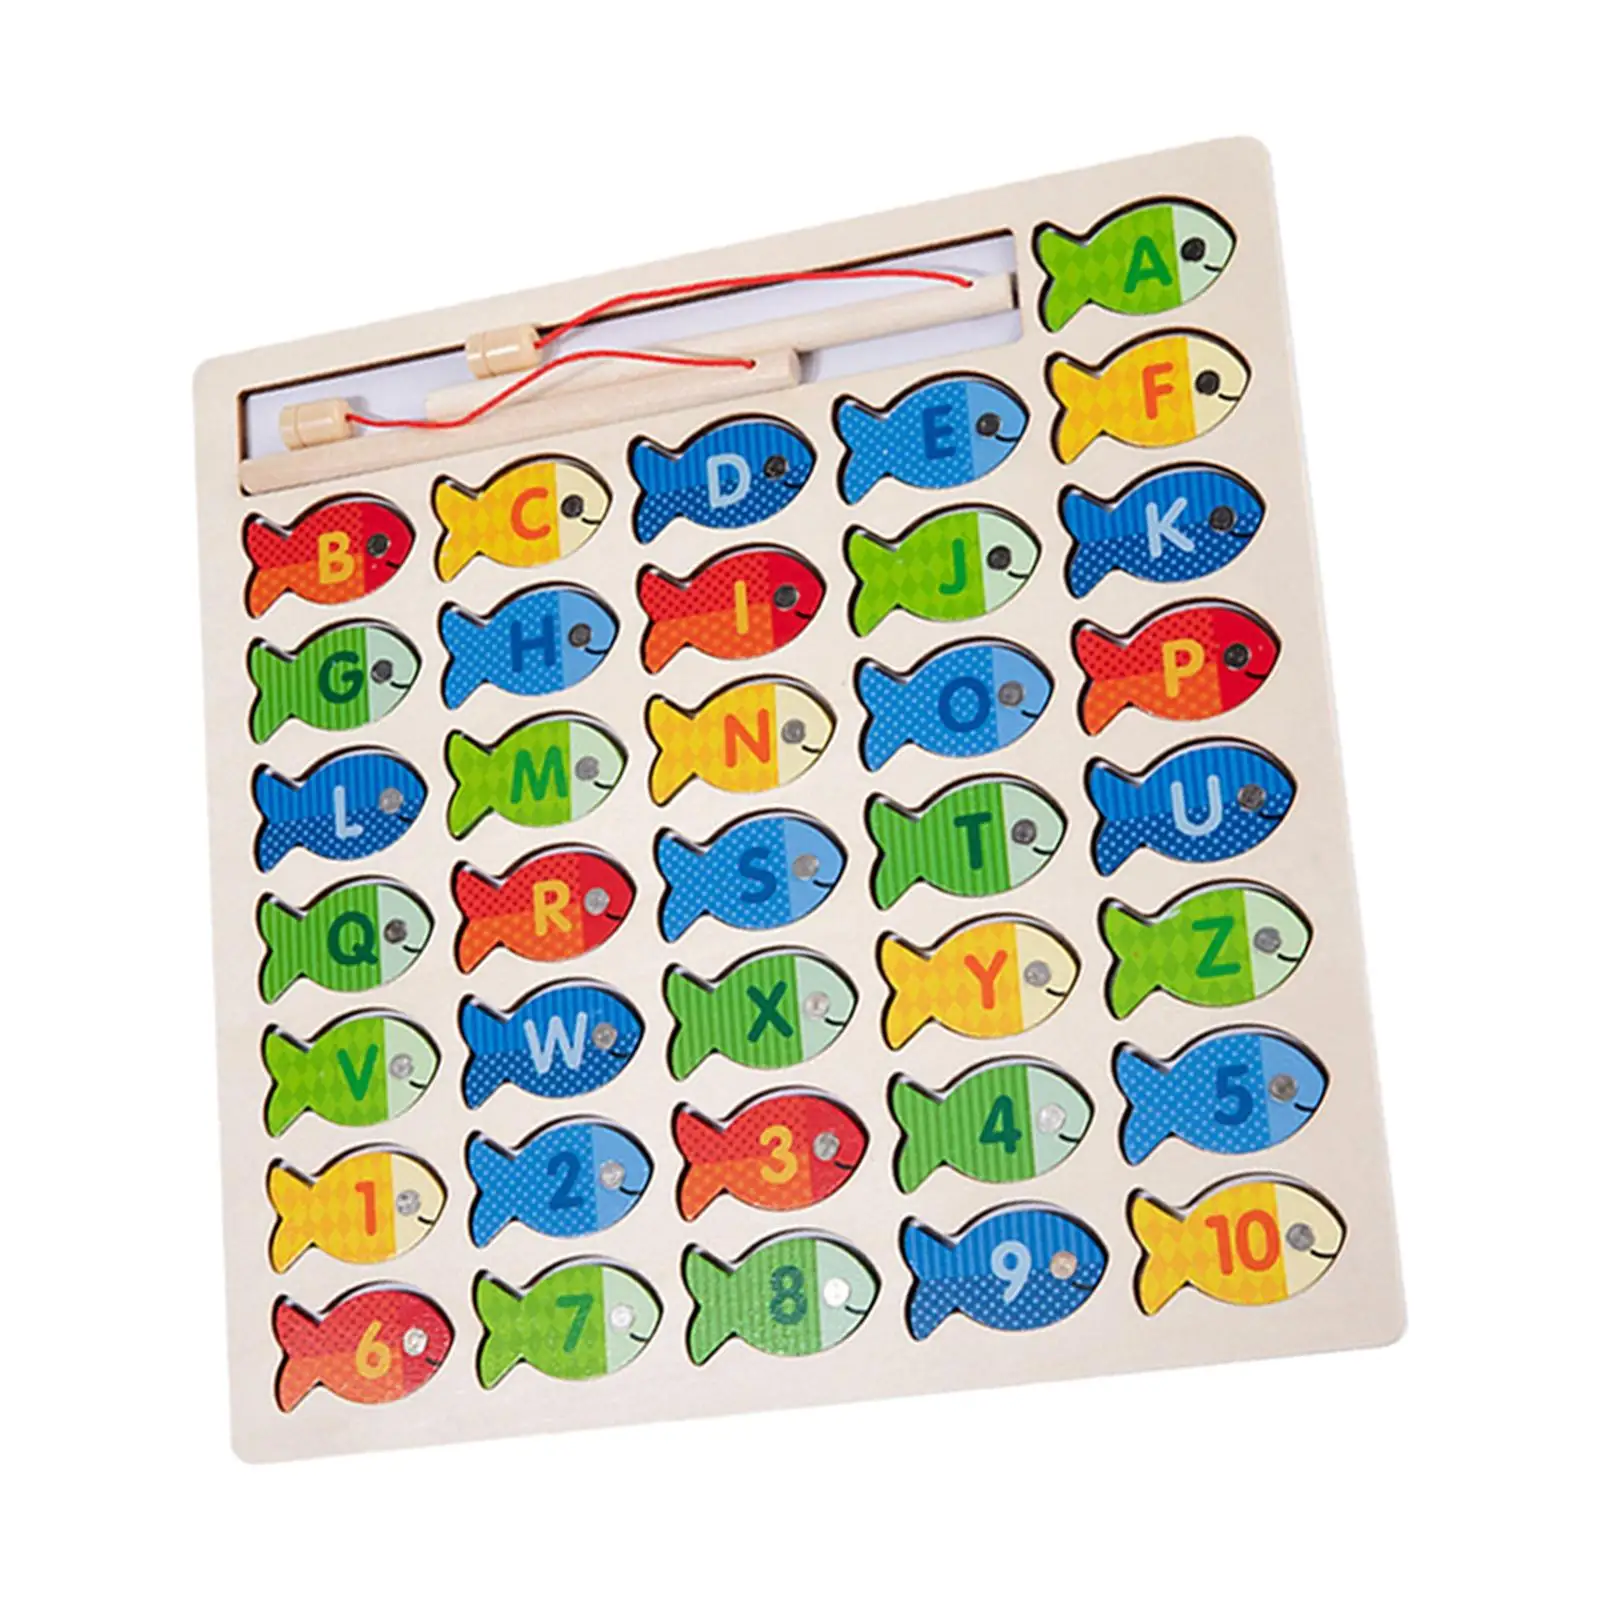 Fishing Game Toy Enlightenment Preschool Board Games Toys Early Educational Montessori for 3 4 5 Years Old Kids Boys Girls